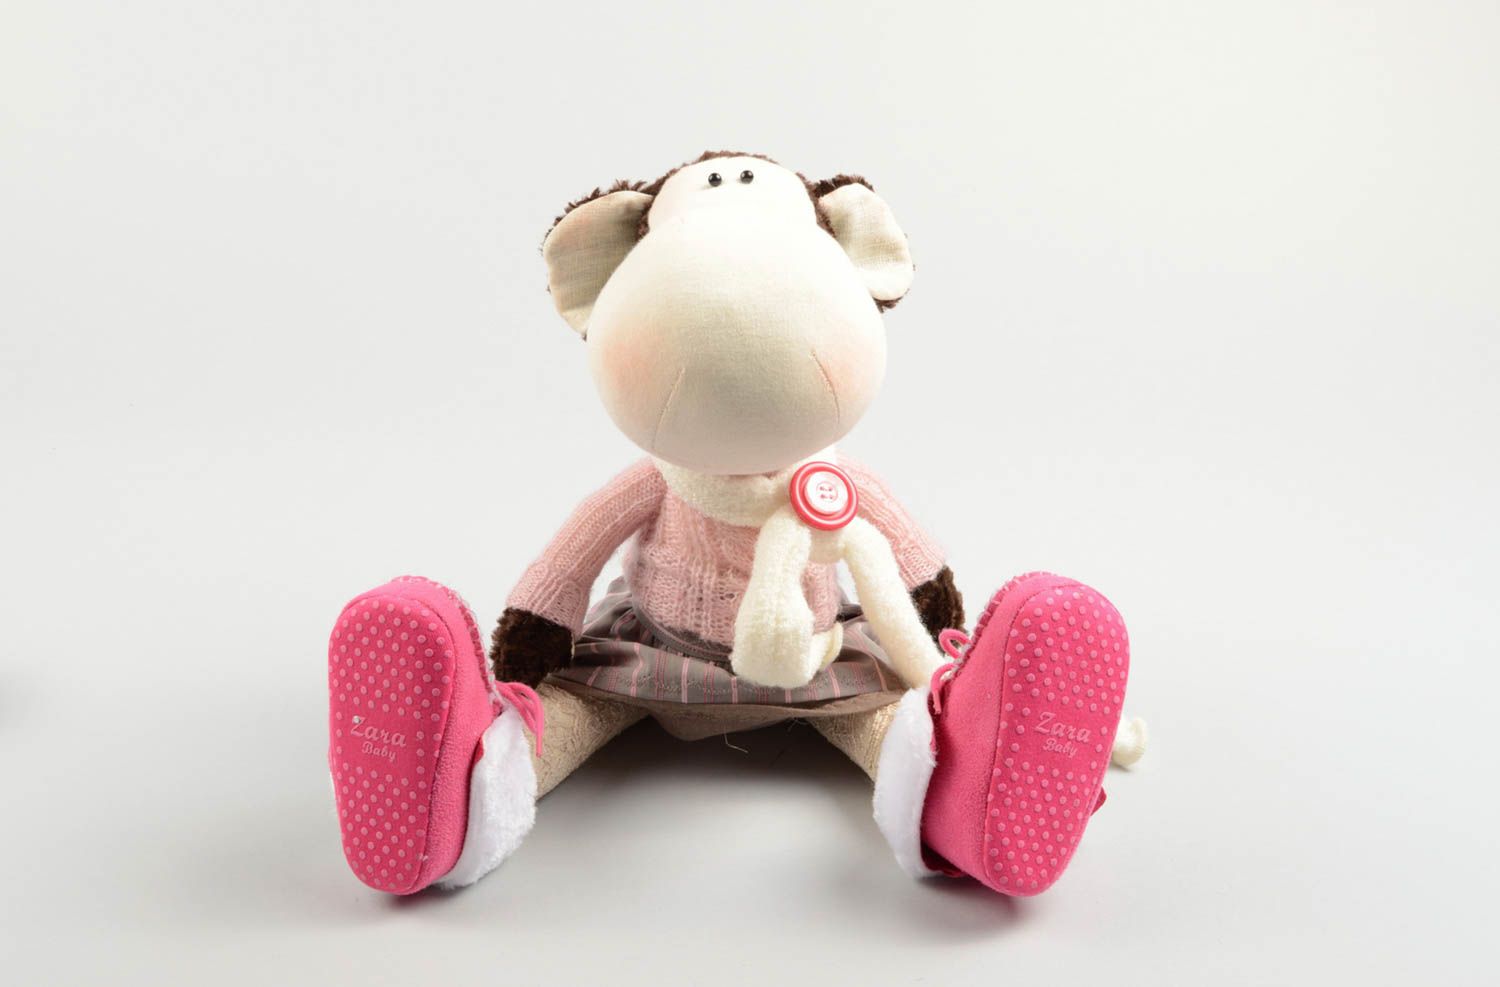 Handmade toy stuffed monkey designer toy soft toy for home decoration nice gift photo 3